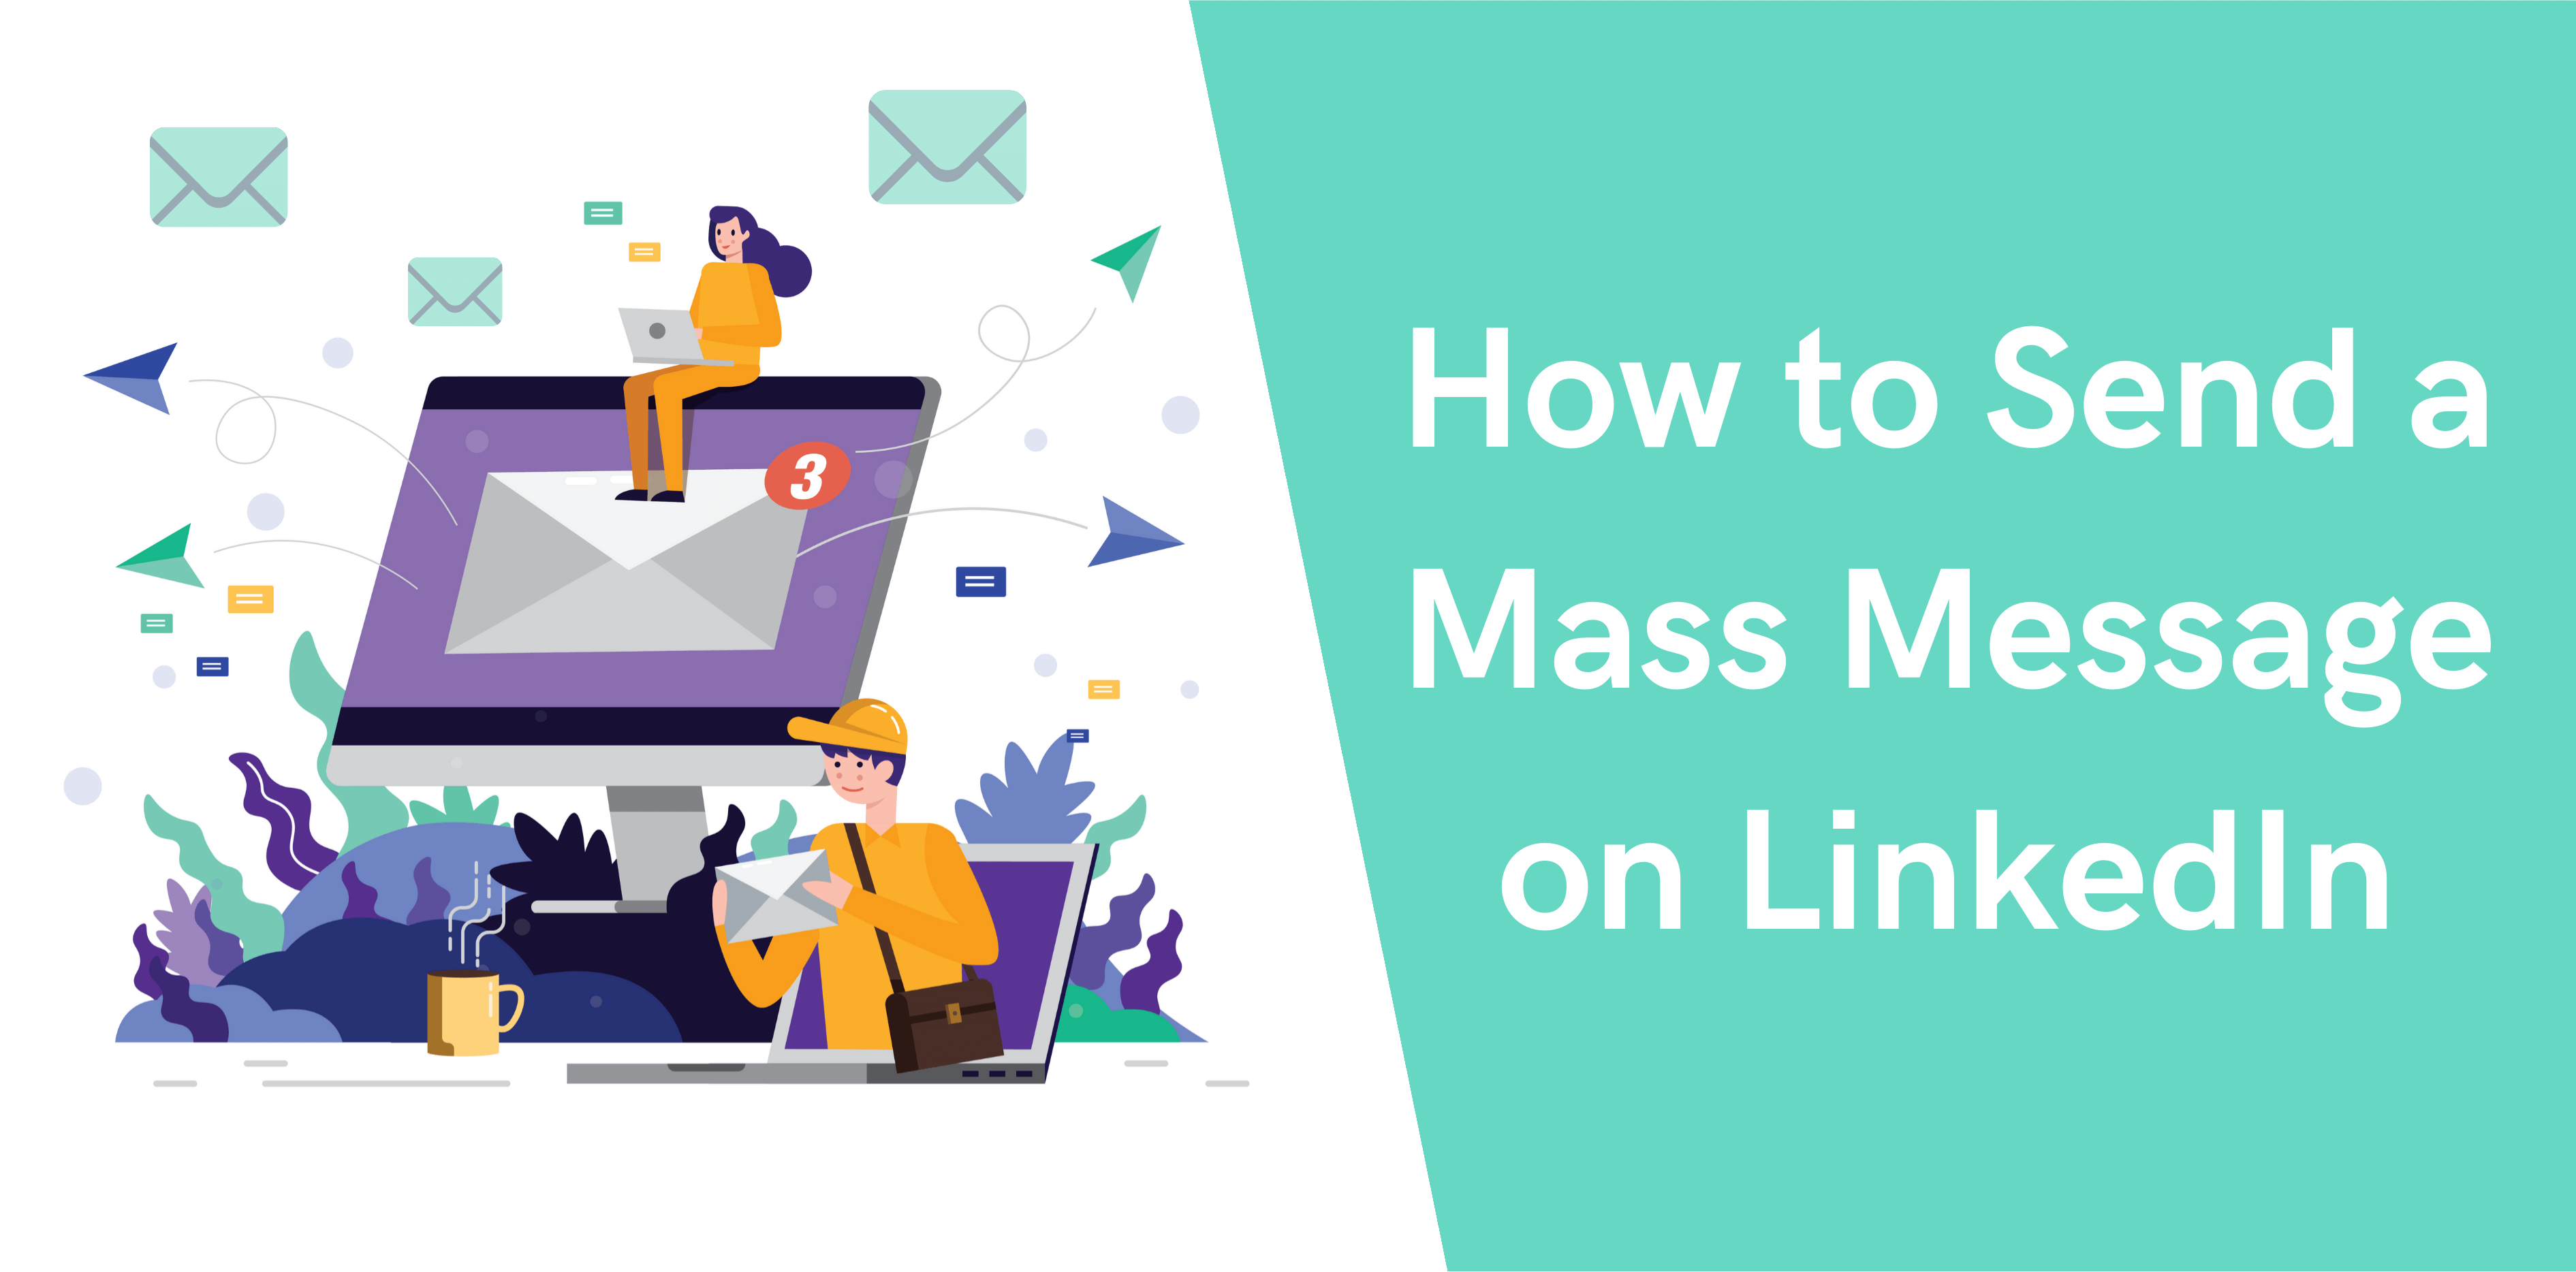 How to Send a Mass Message On LinkedIn? - Octopus CRM